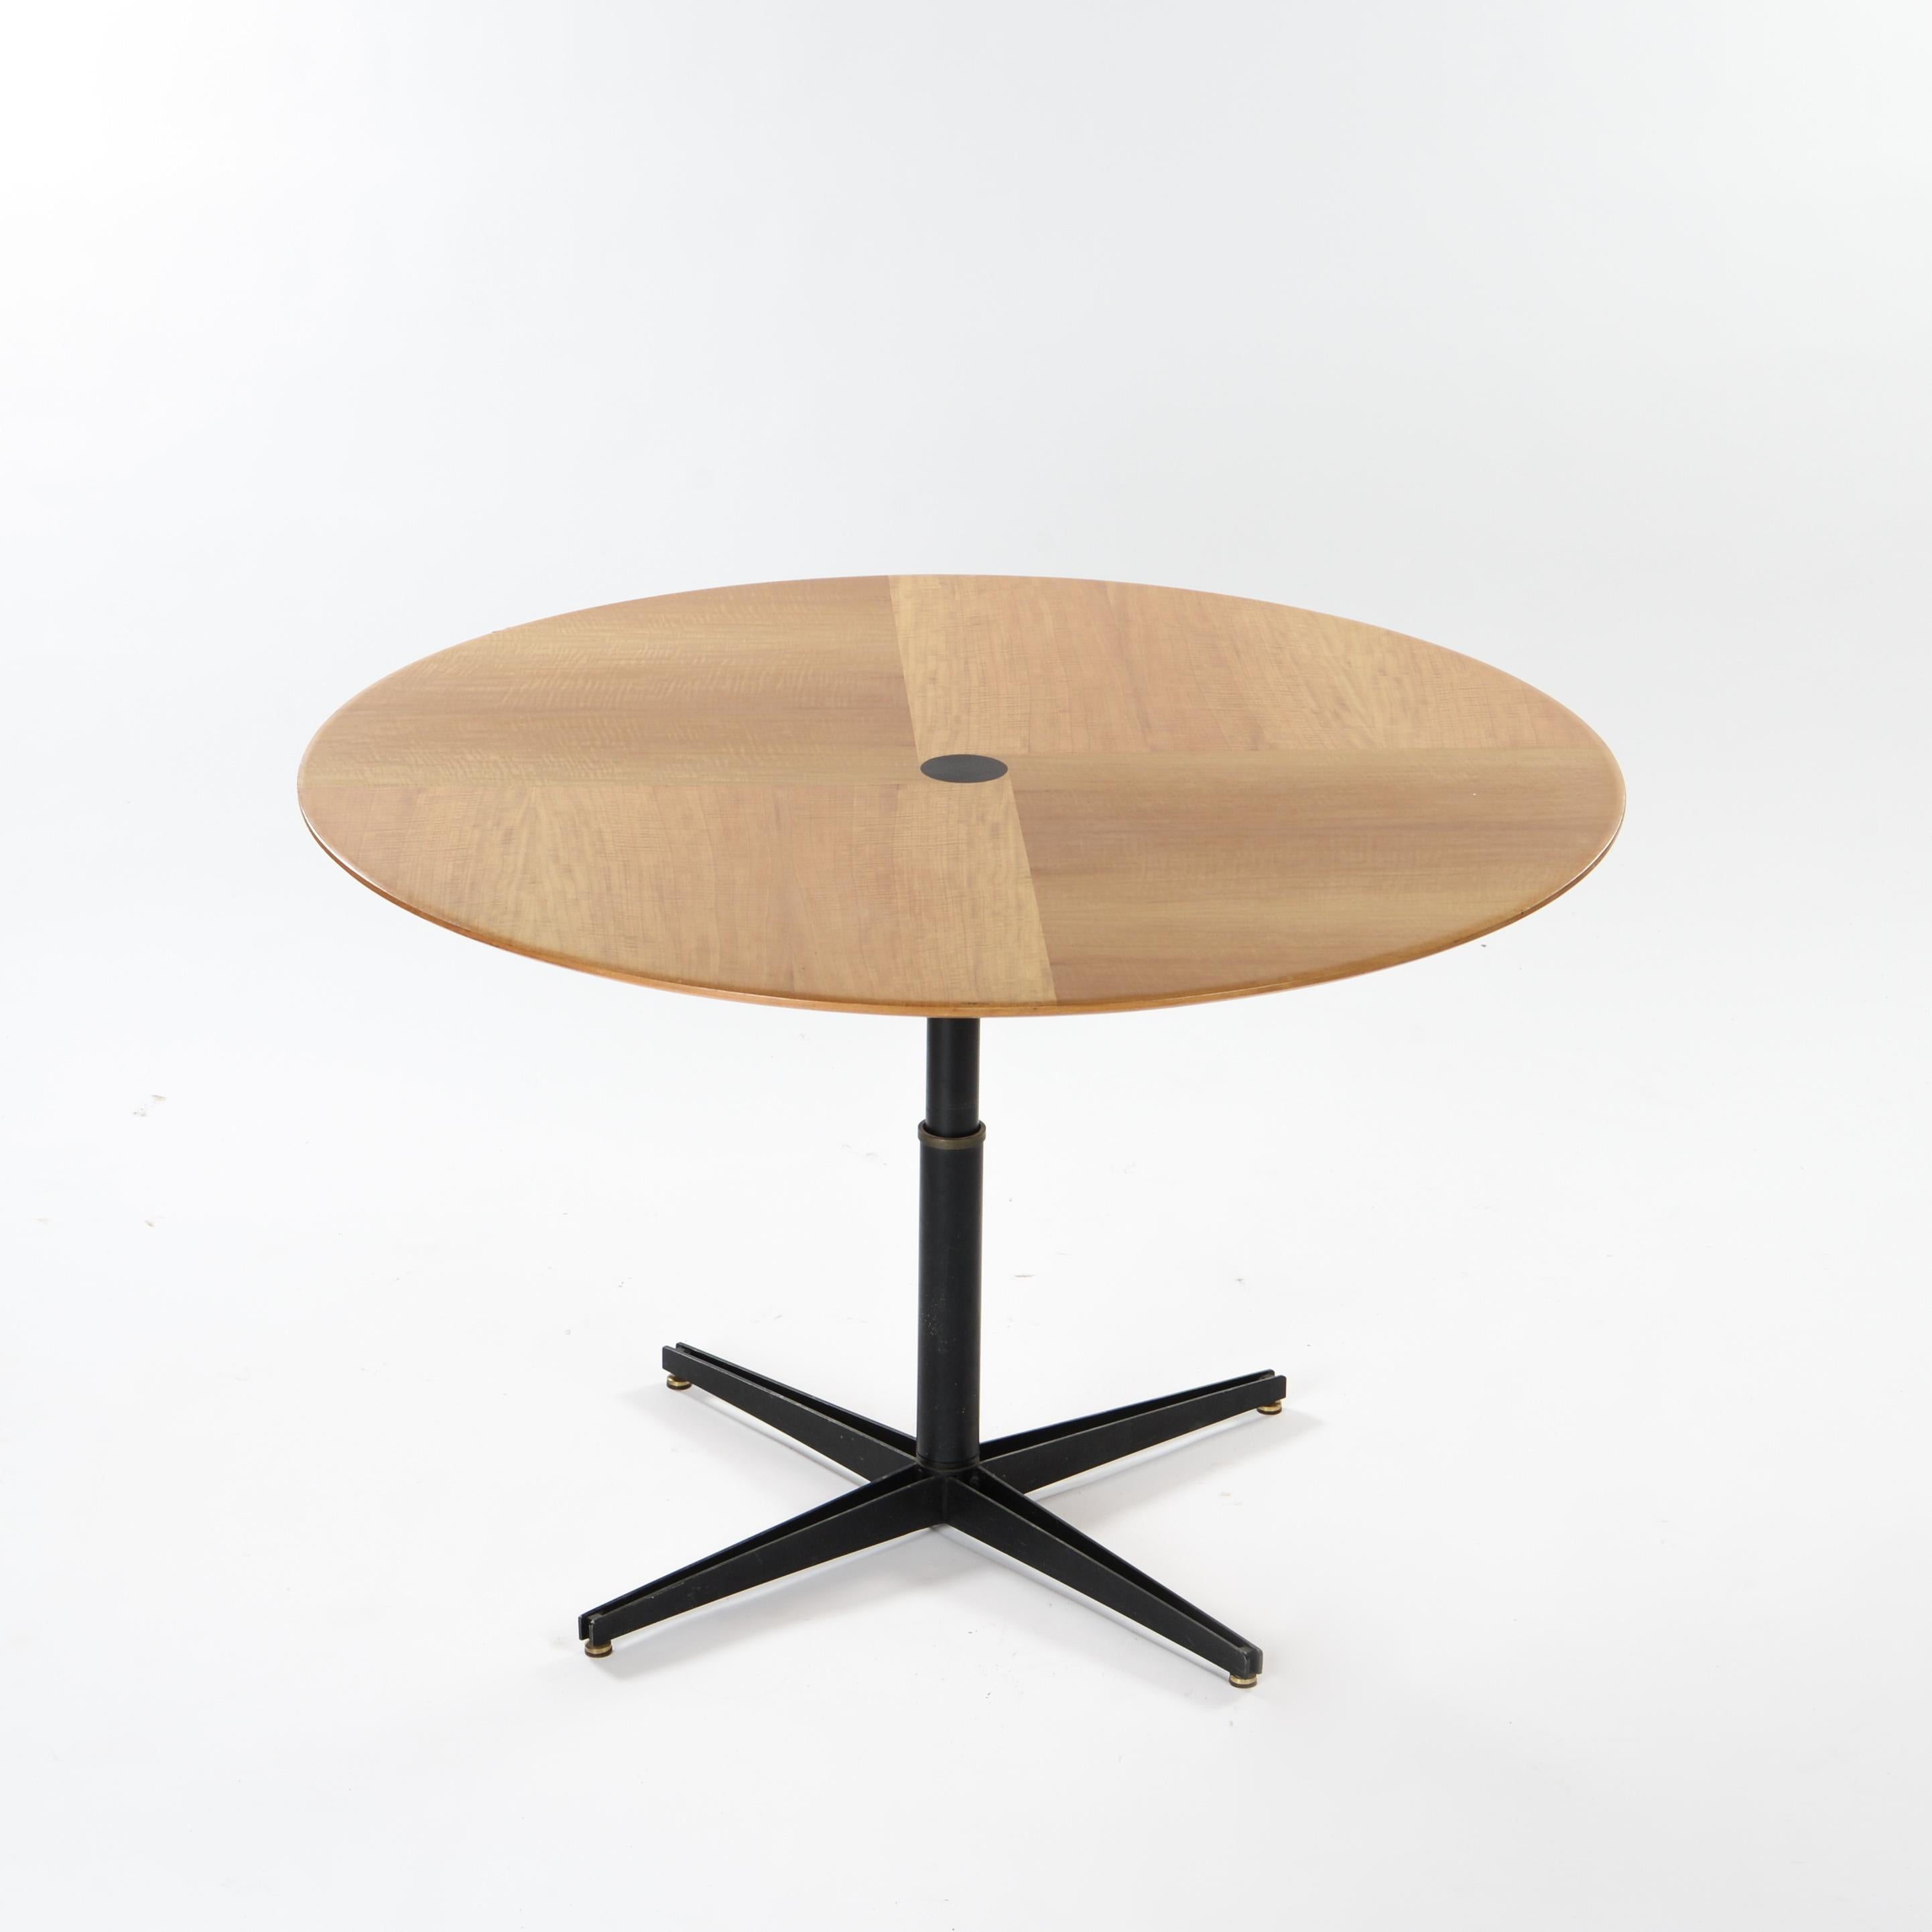 
Elegant adjustable table, model T41 by Italian designer Osvaldo Borsani.

The circular top in lemon veneer is in very good condition and rests on a black-lacquered metal cruciform central pedestal. 

The adjustable height, controlled by a